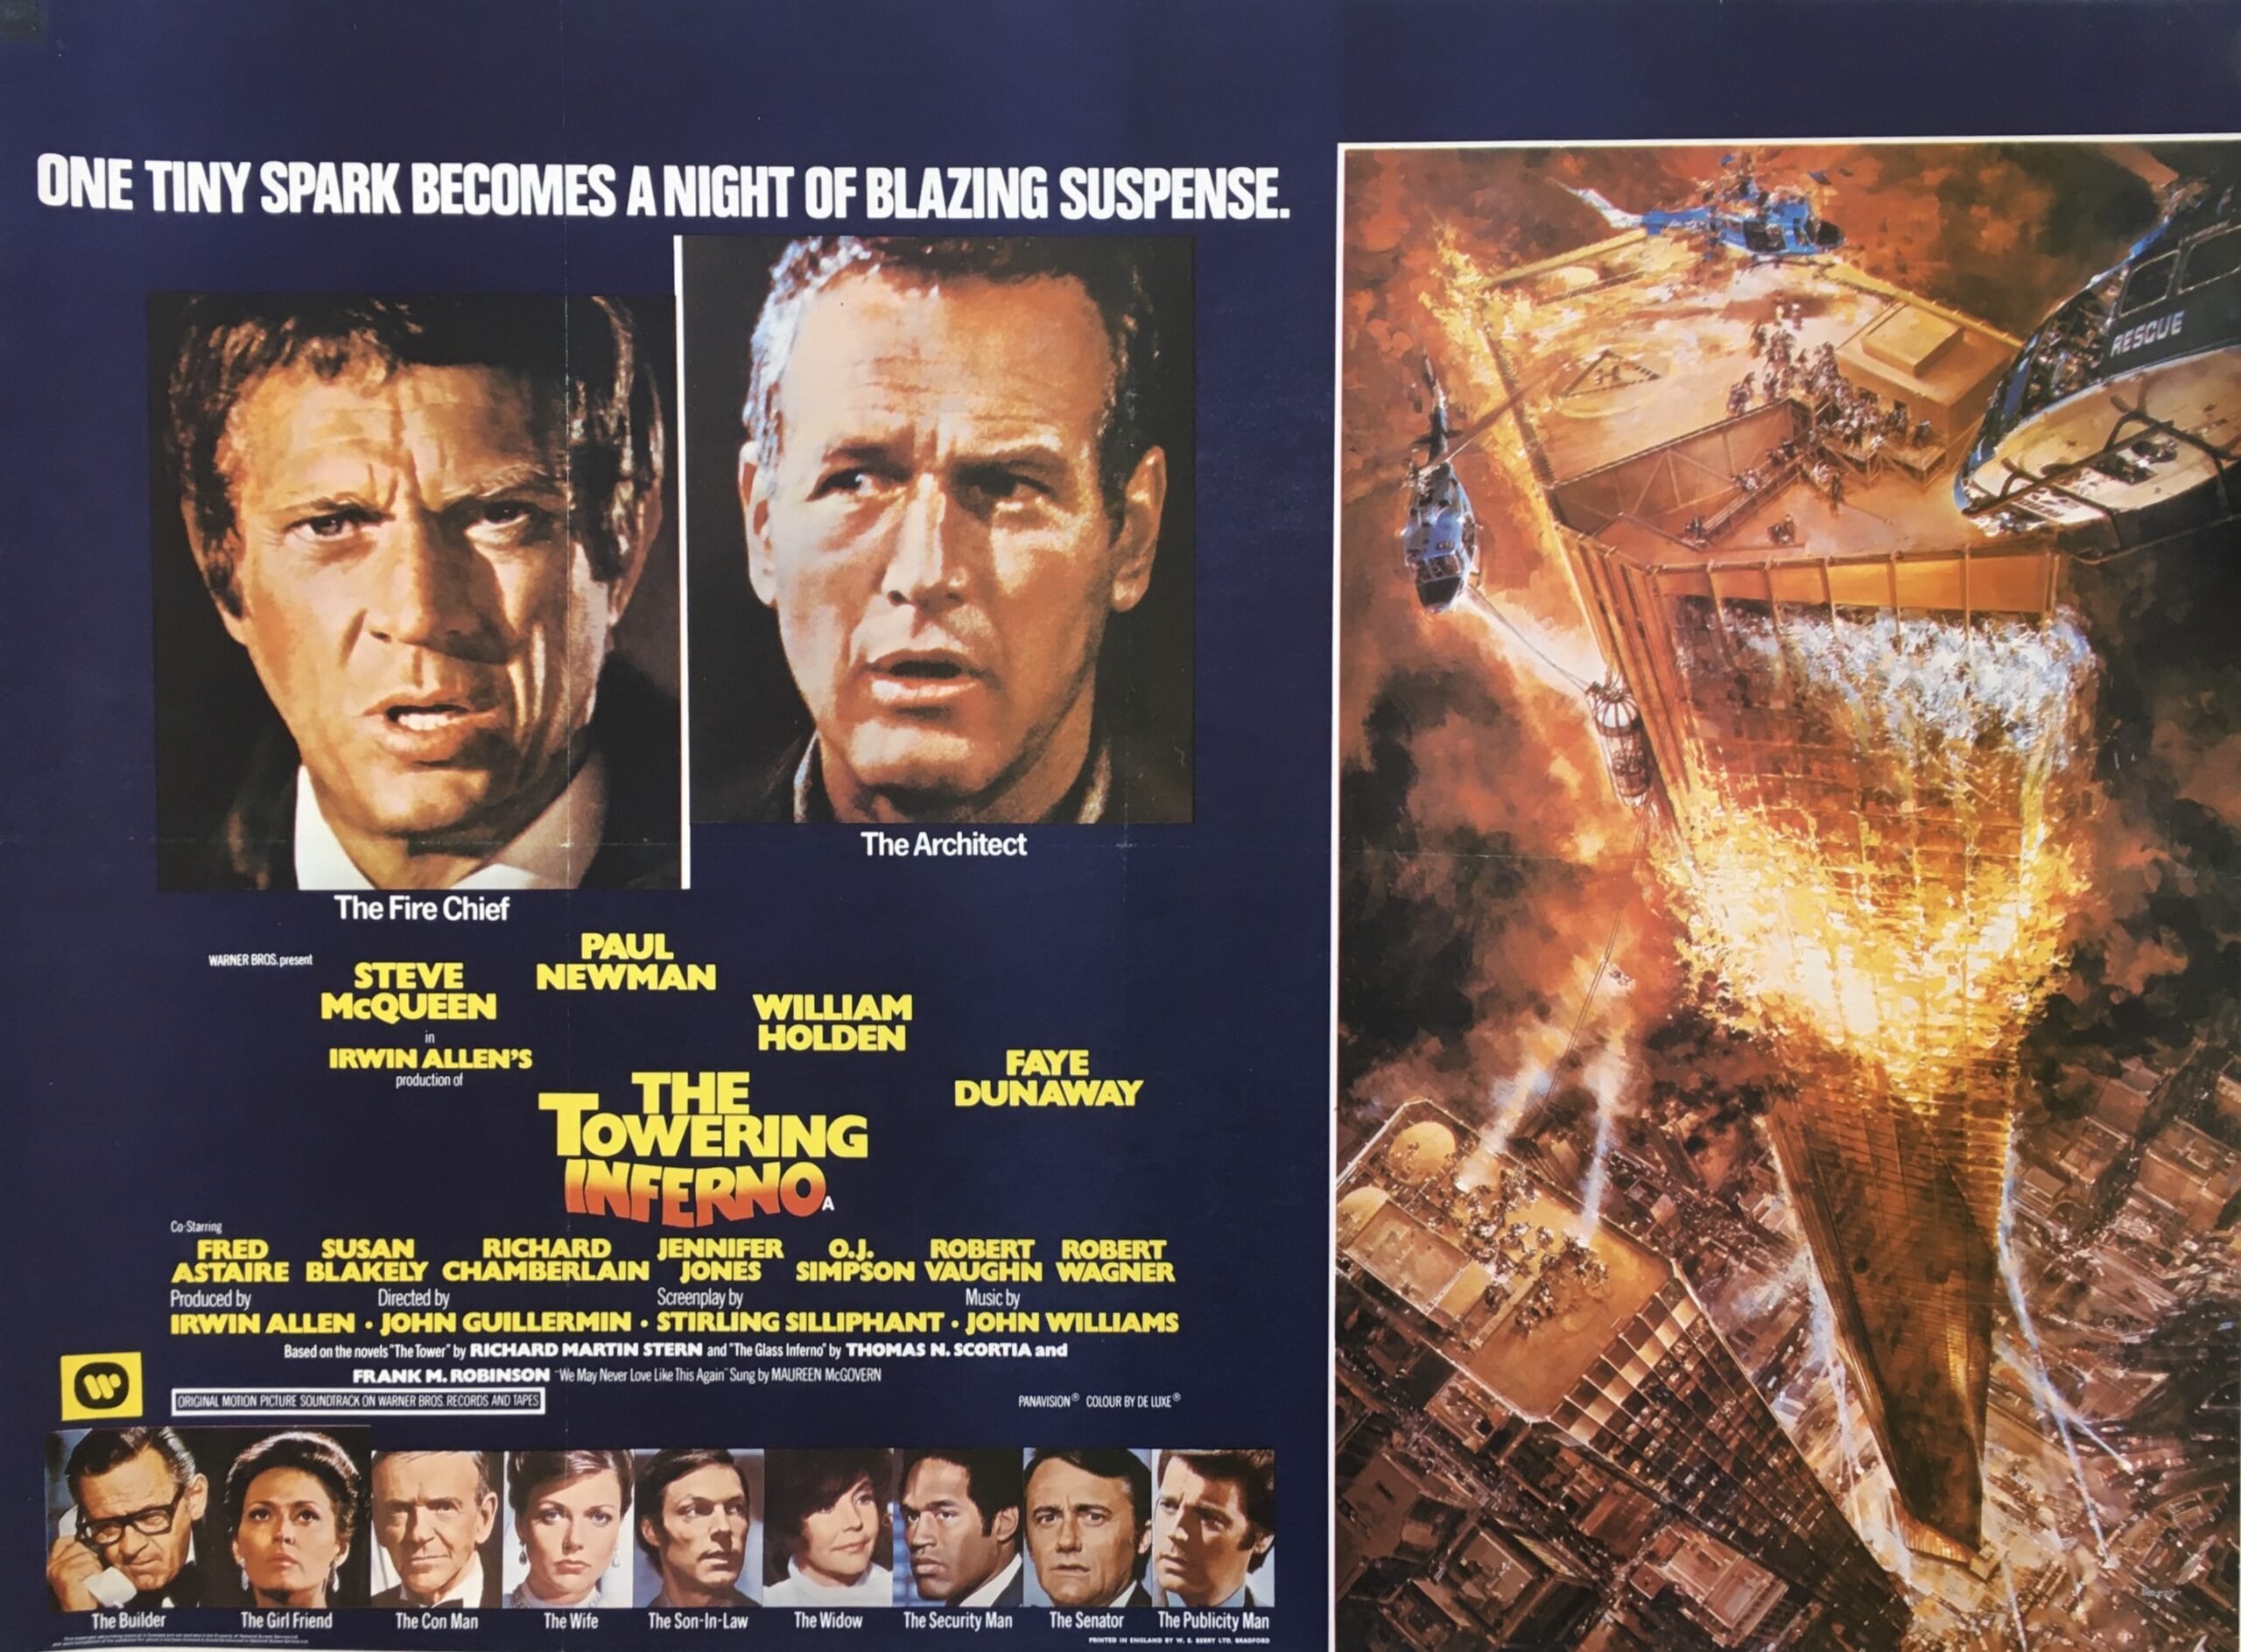 Original vintage cinema movie poster for The Towering Inferno